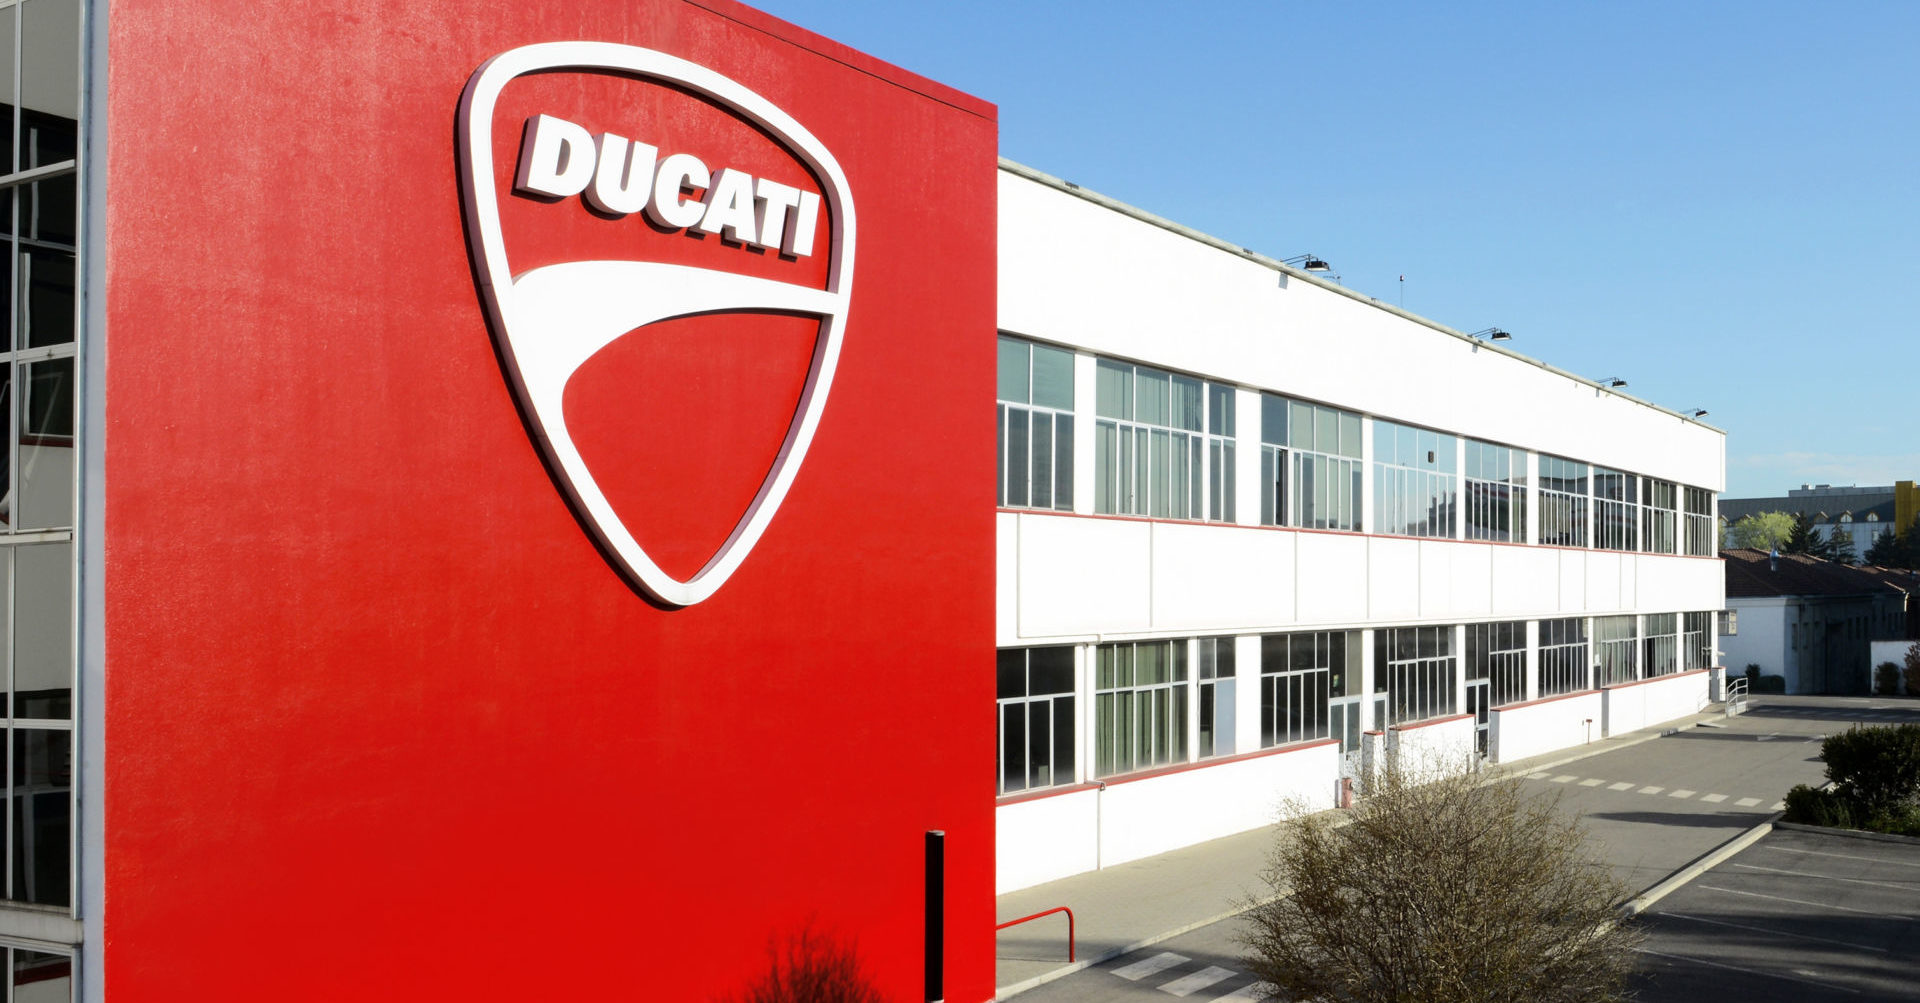 Ducati Motor Holding's headquarters and factory in Borgo Panigale, Italy. Photo courtesy of Ducati.